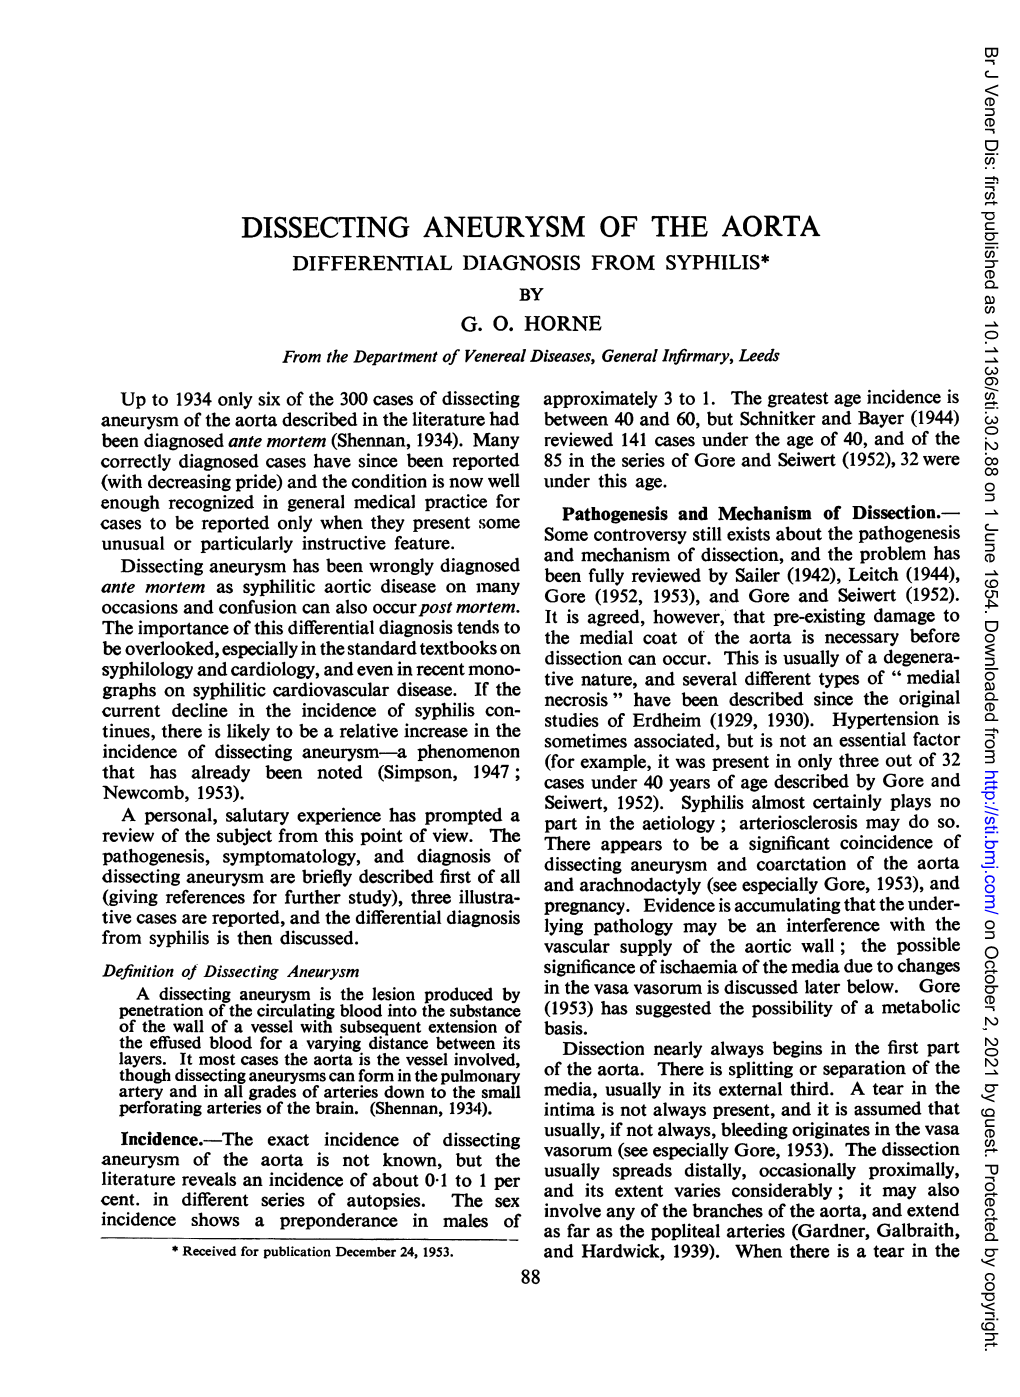 Dissecting Aneurysm of the Aorta Differential Diagnosis from Syphilis* by G